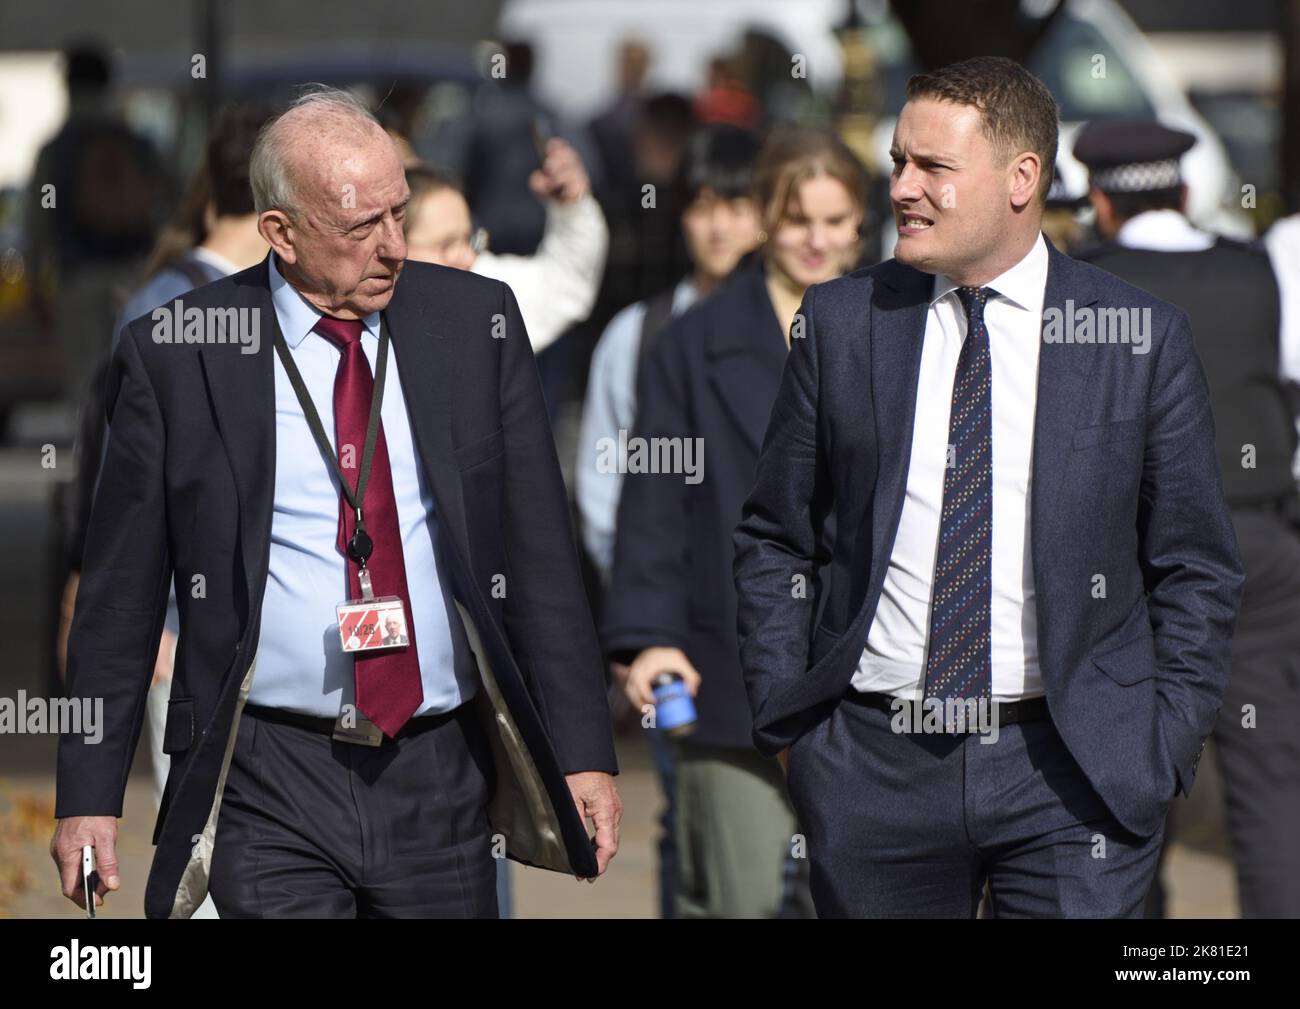 Robert Hayward, Baron Hayward (Conservative peer, former MP) talking to Wes Streeting MP (Labour: Shadow Secretary of State for Health and Social Care Stock Photo